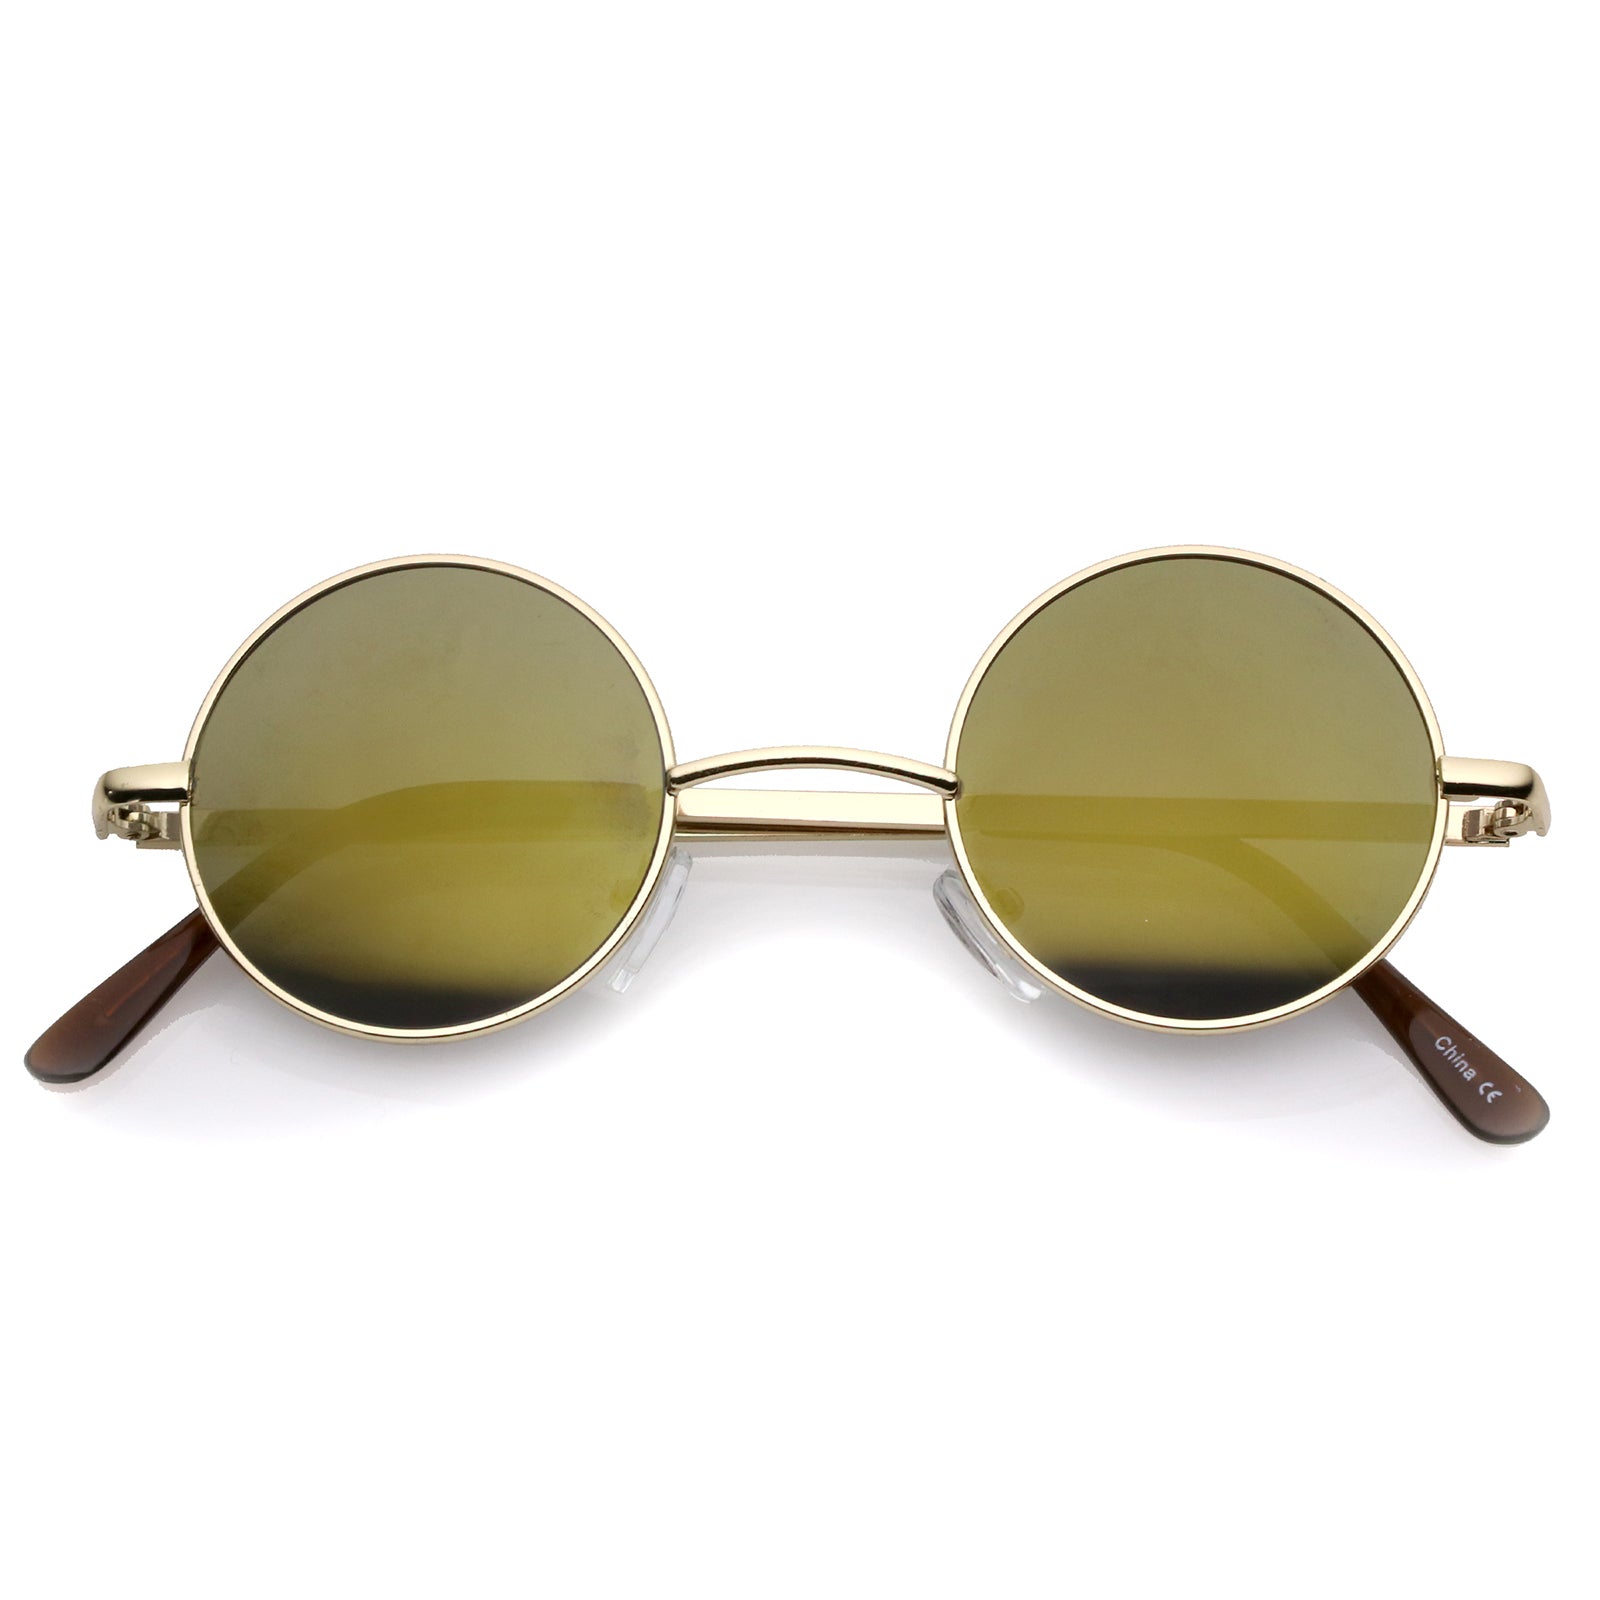 Lennon Style Round Circle Metal Sunglasses with Color Mirror Lens - sunglass